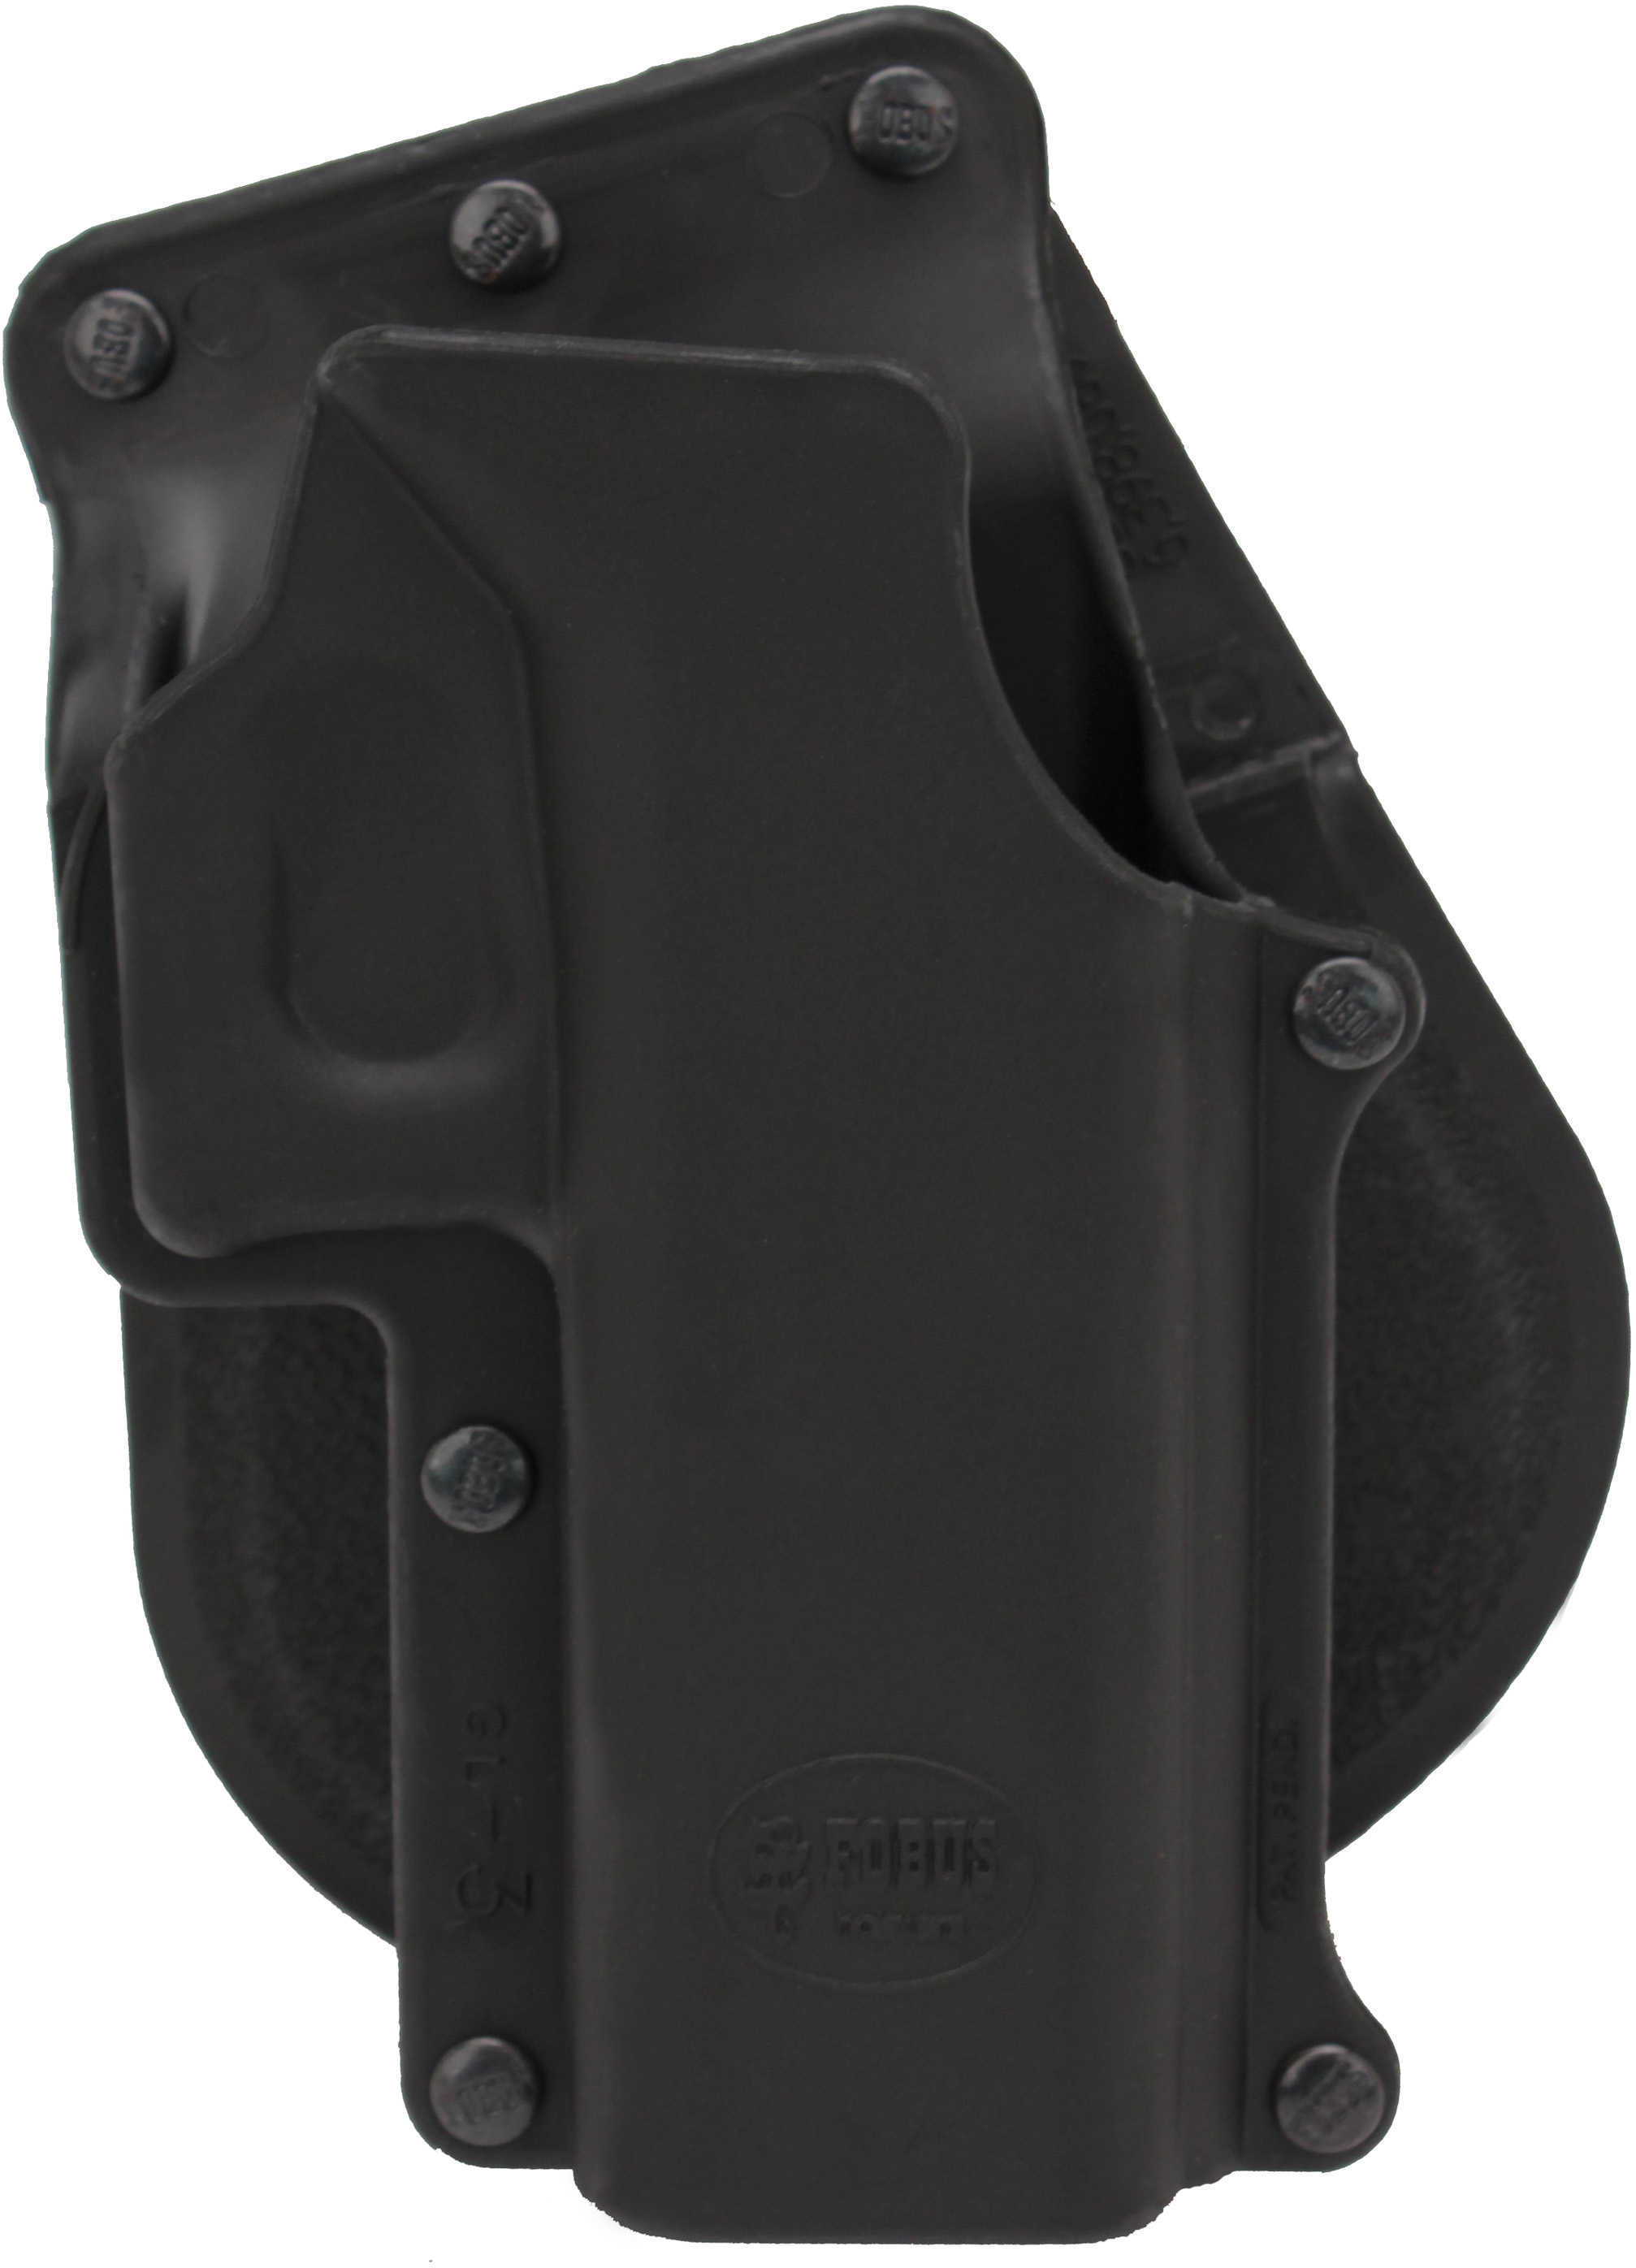 Fobus Paddle Holster Fits Glock 20/21/37/38 Right Hand Kydex Black GL3